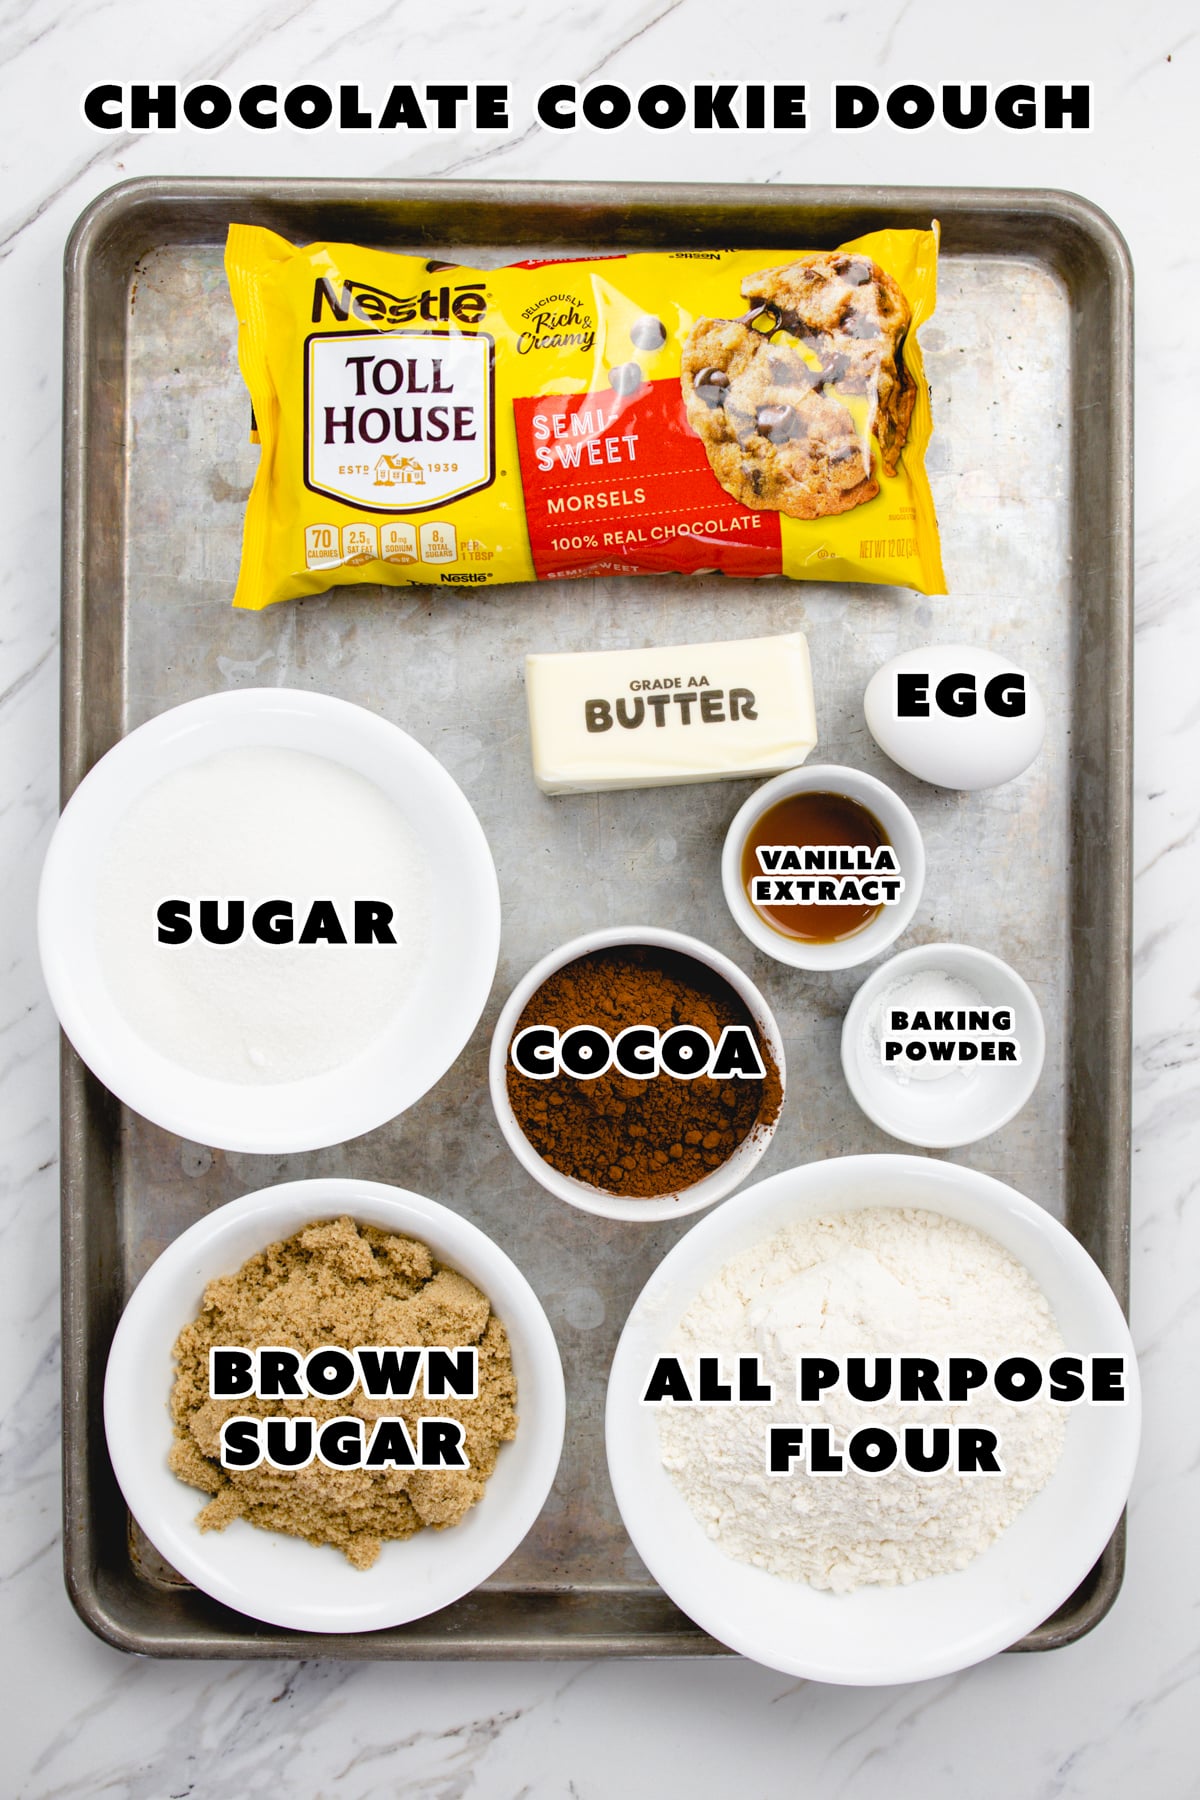 Top view of ingredients needed to make Chocolate Peanut Butter Cookie dough on a baking tray.